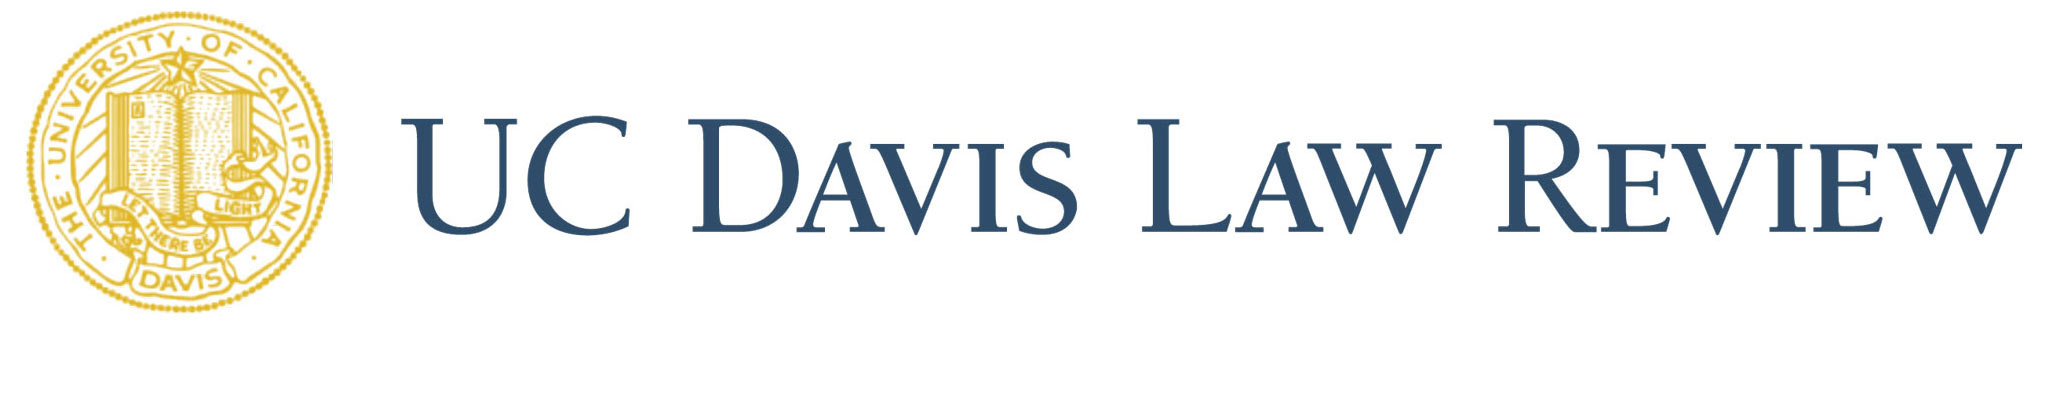 "Graphic: "UC Davis Law Review" with UC Davis seal (gold)